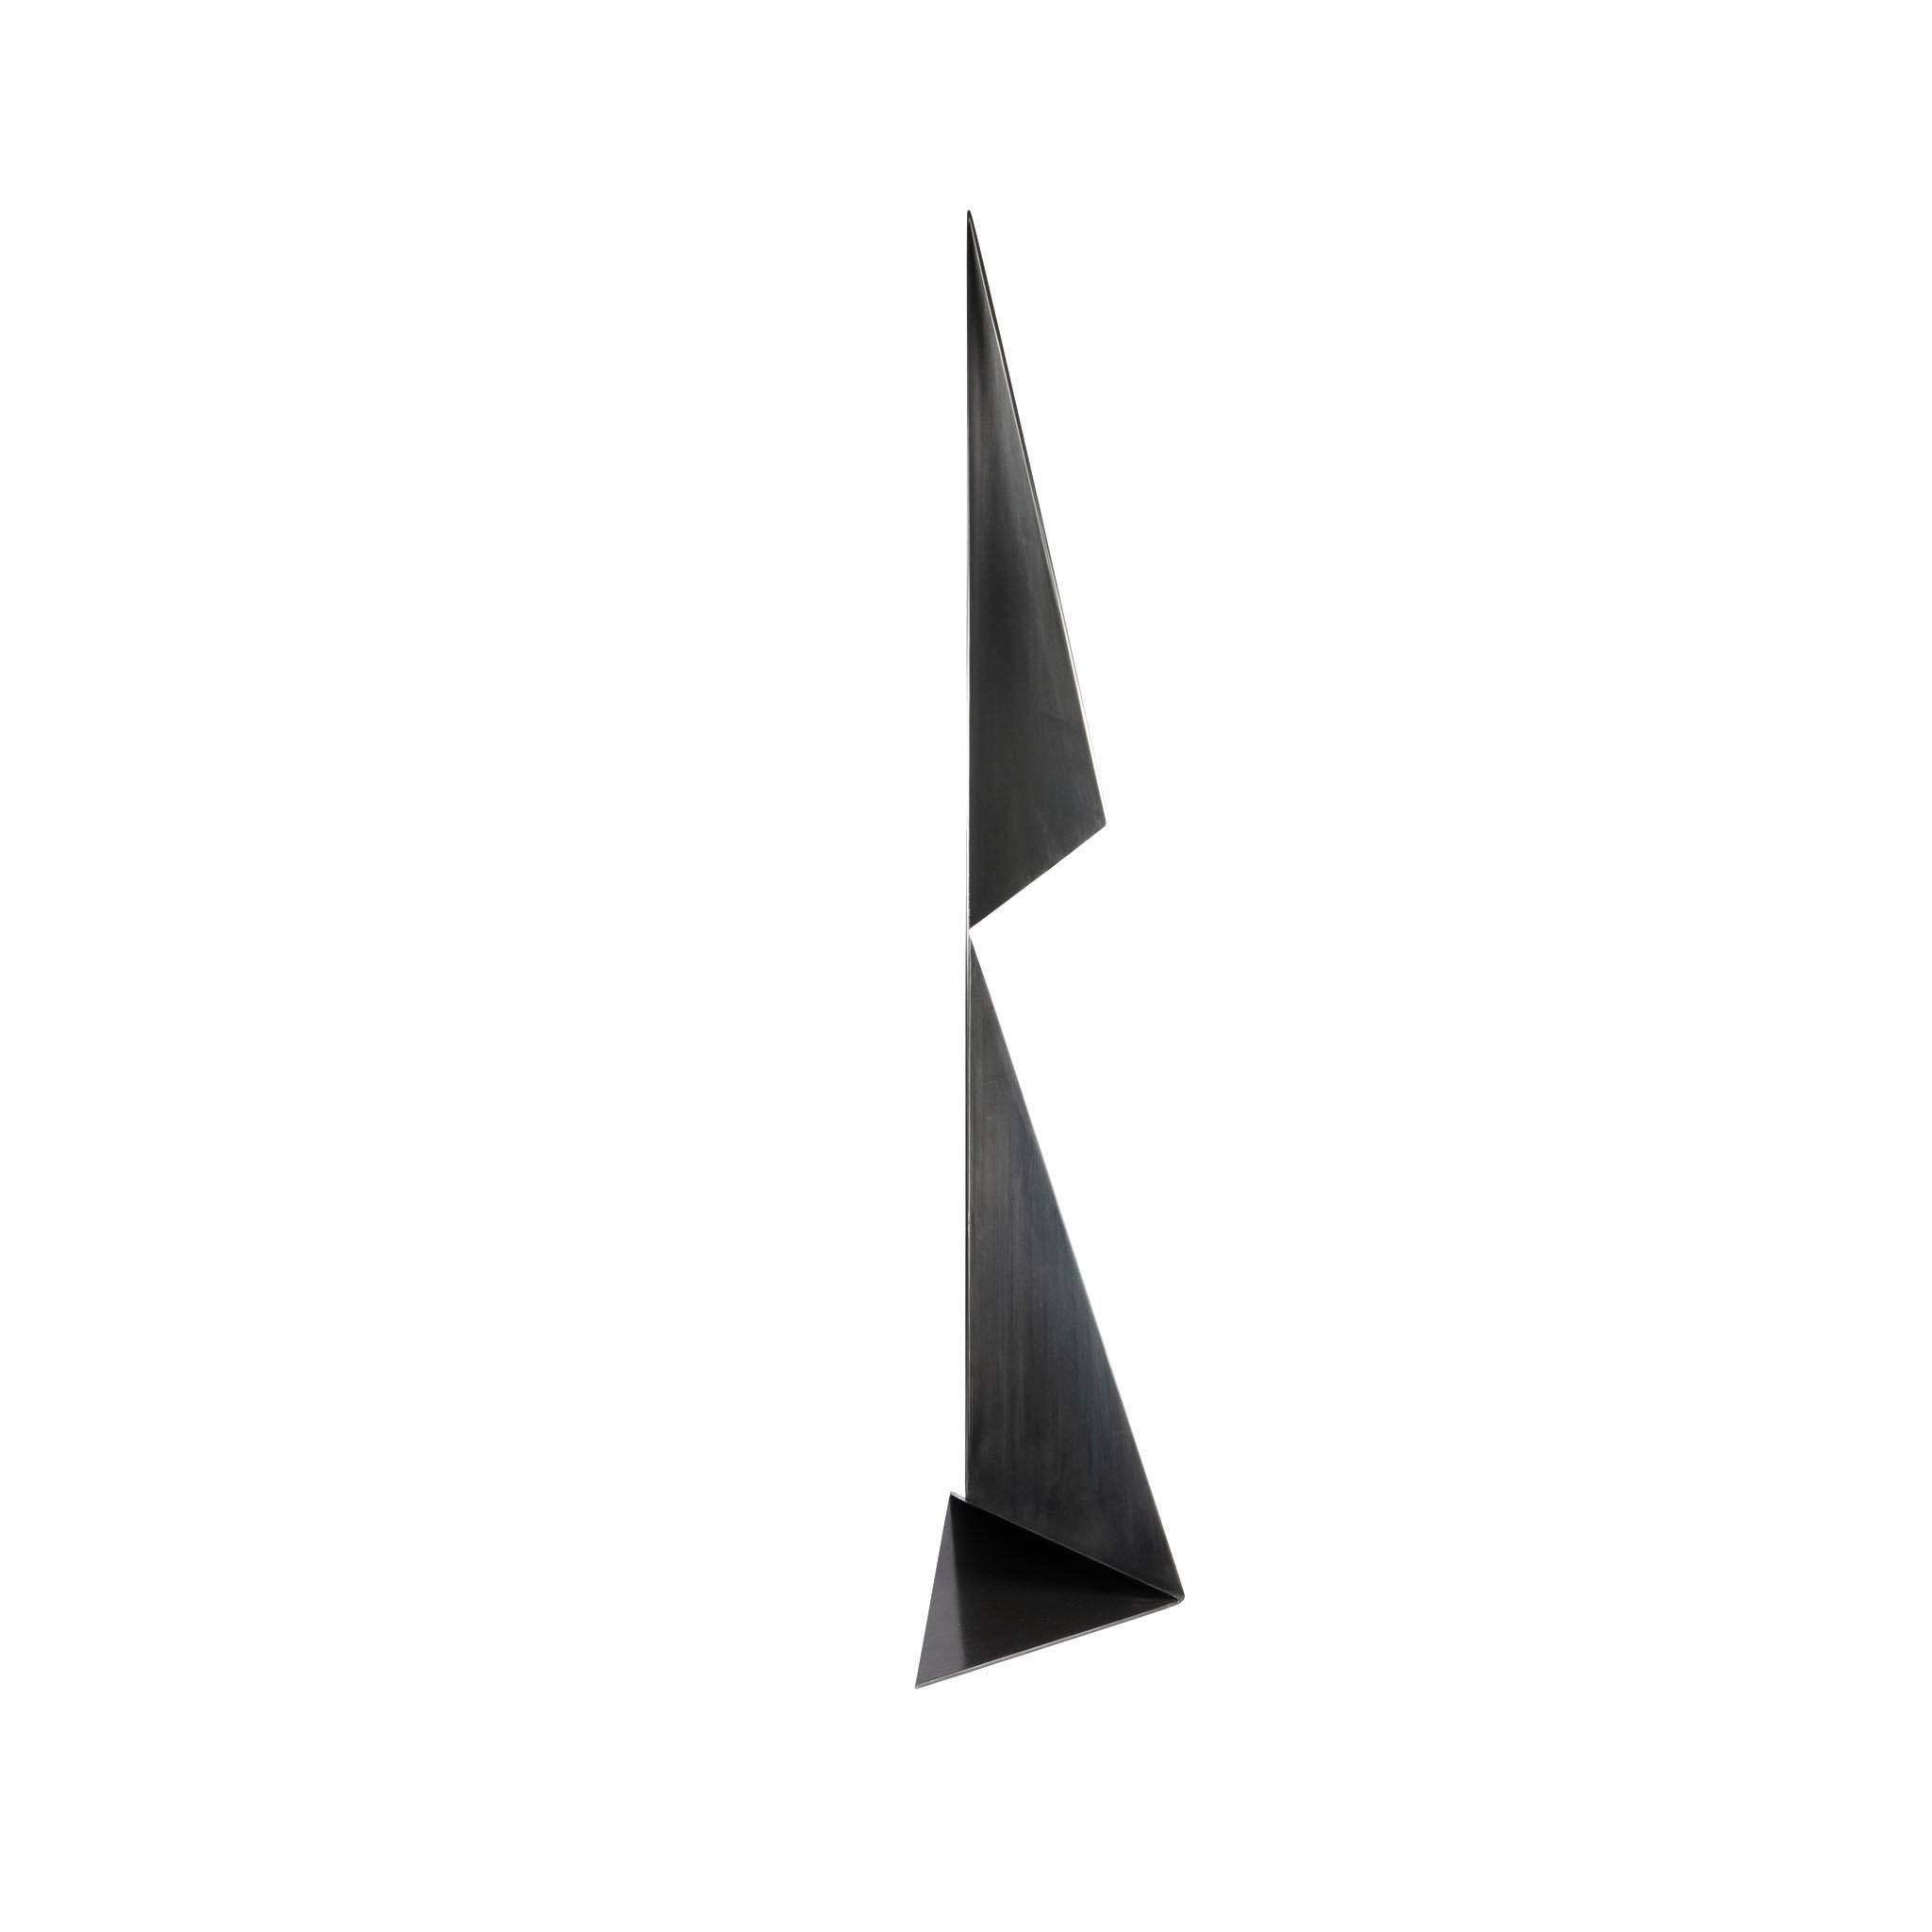 Modern Tall Abstract Origami Art Metal Sculpture Figure in a Hand Blackened Finish For Sale